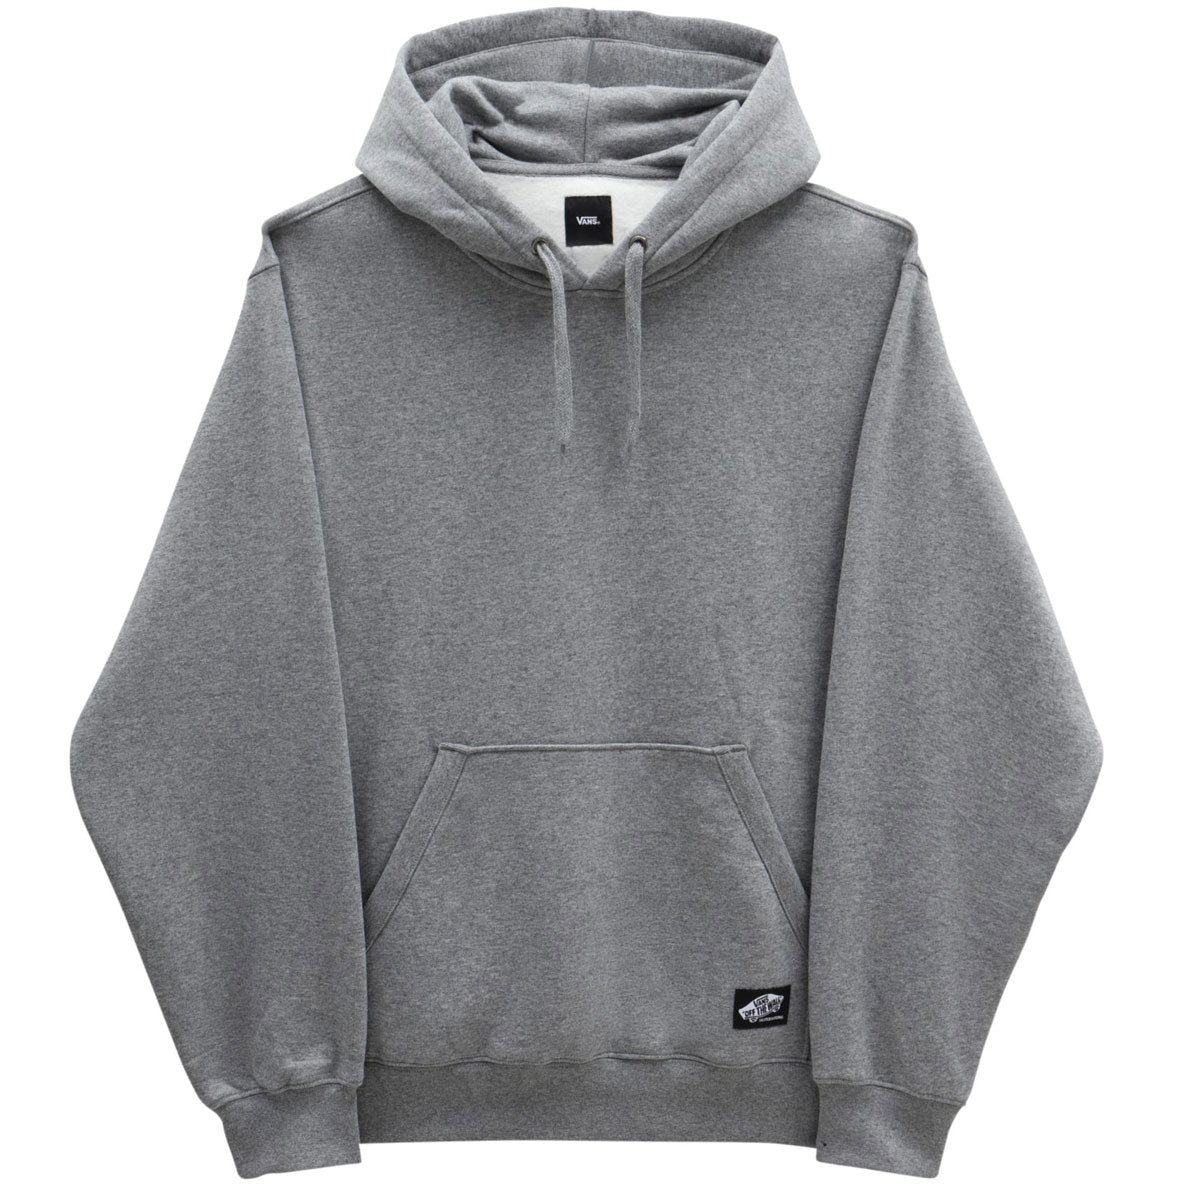 Vans Skate Classics Patch Hoodie - Cement Heather image 1